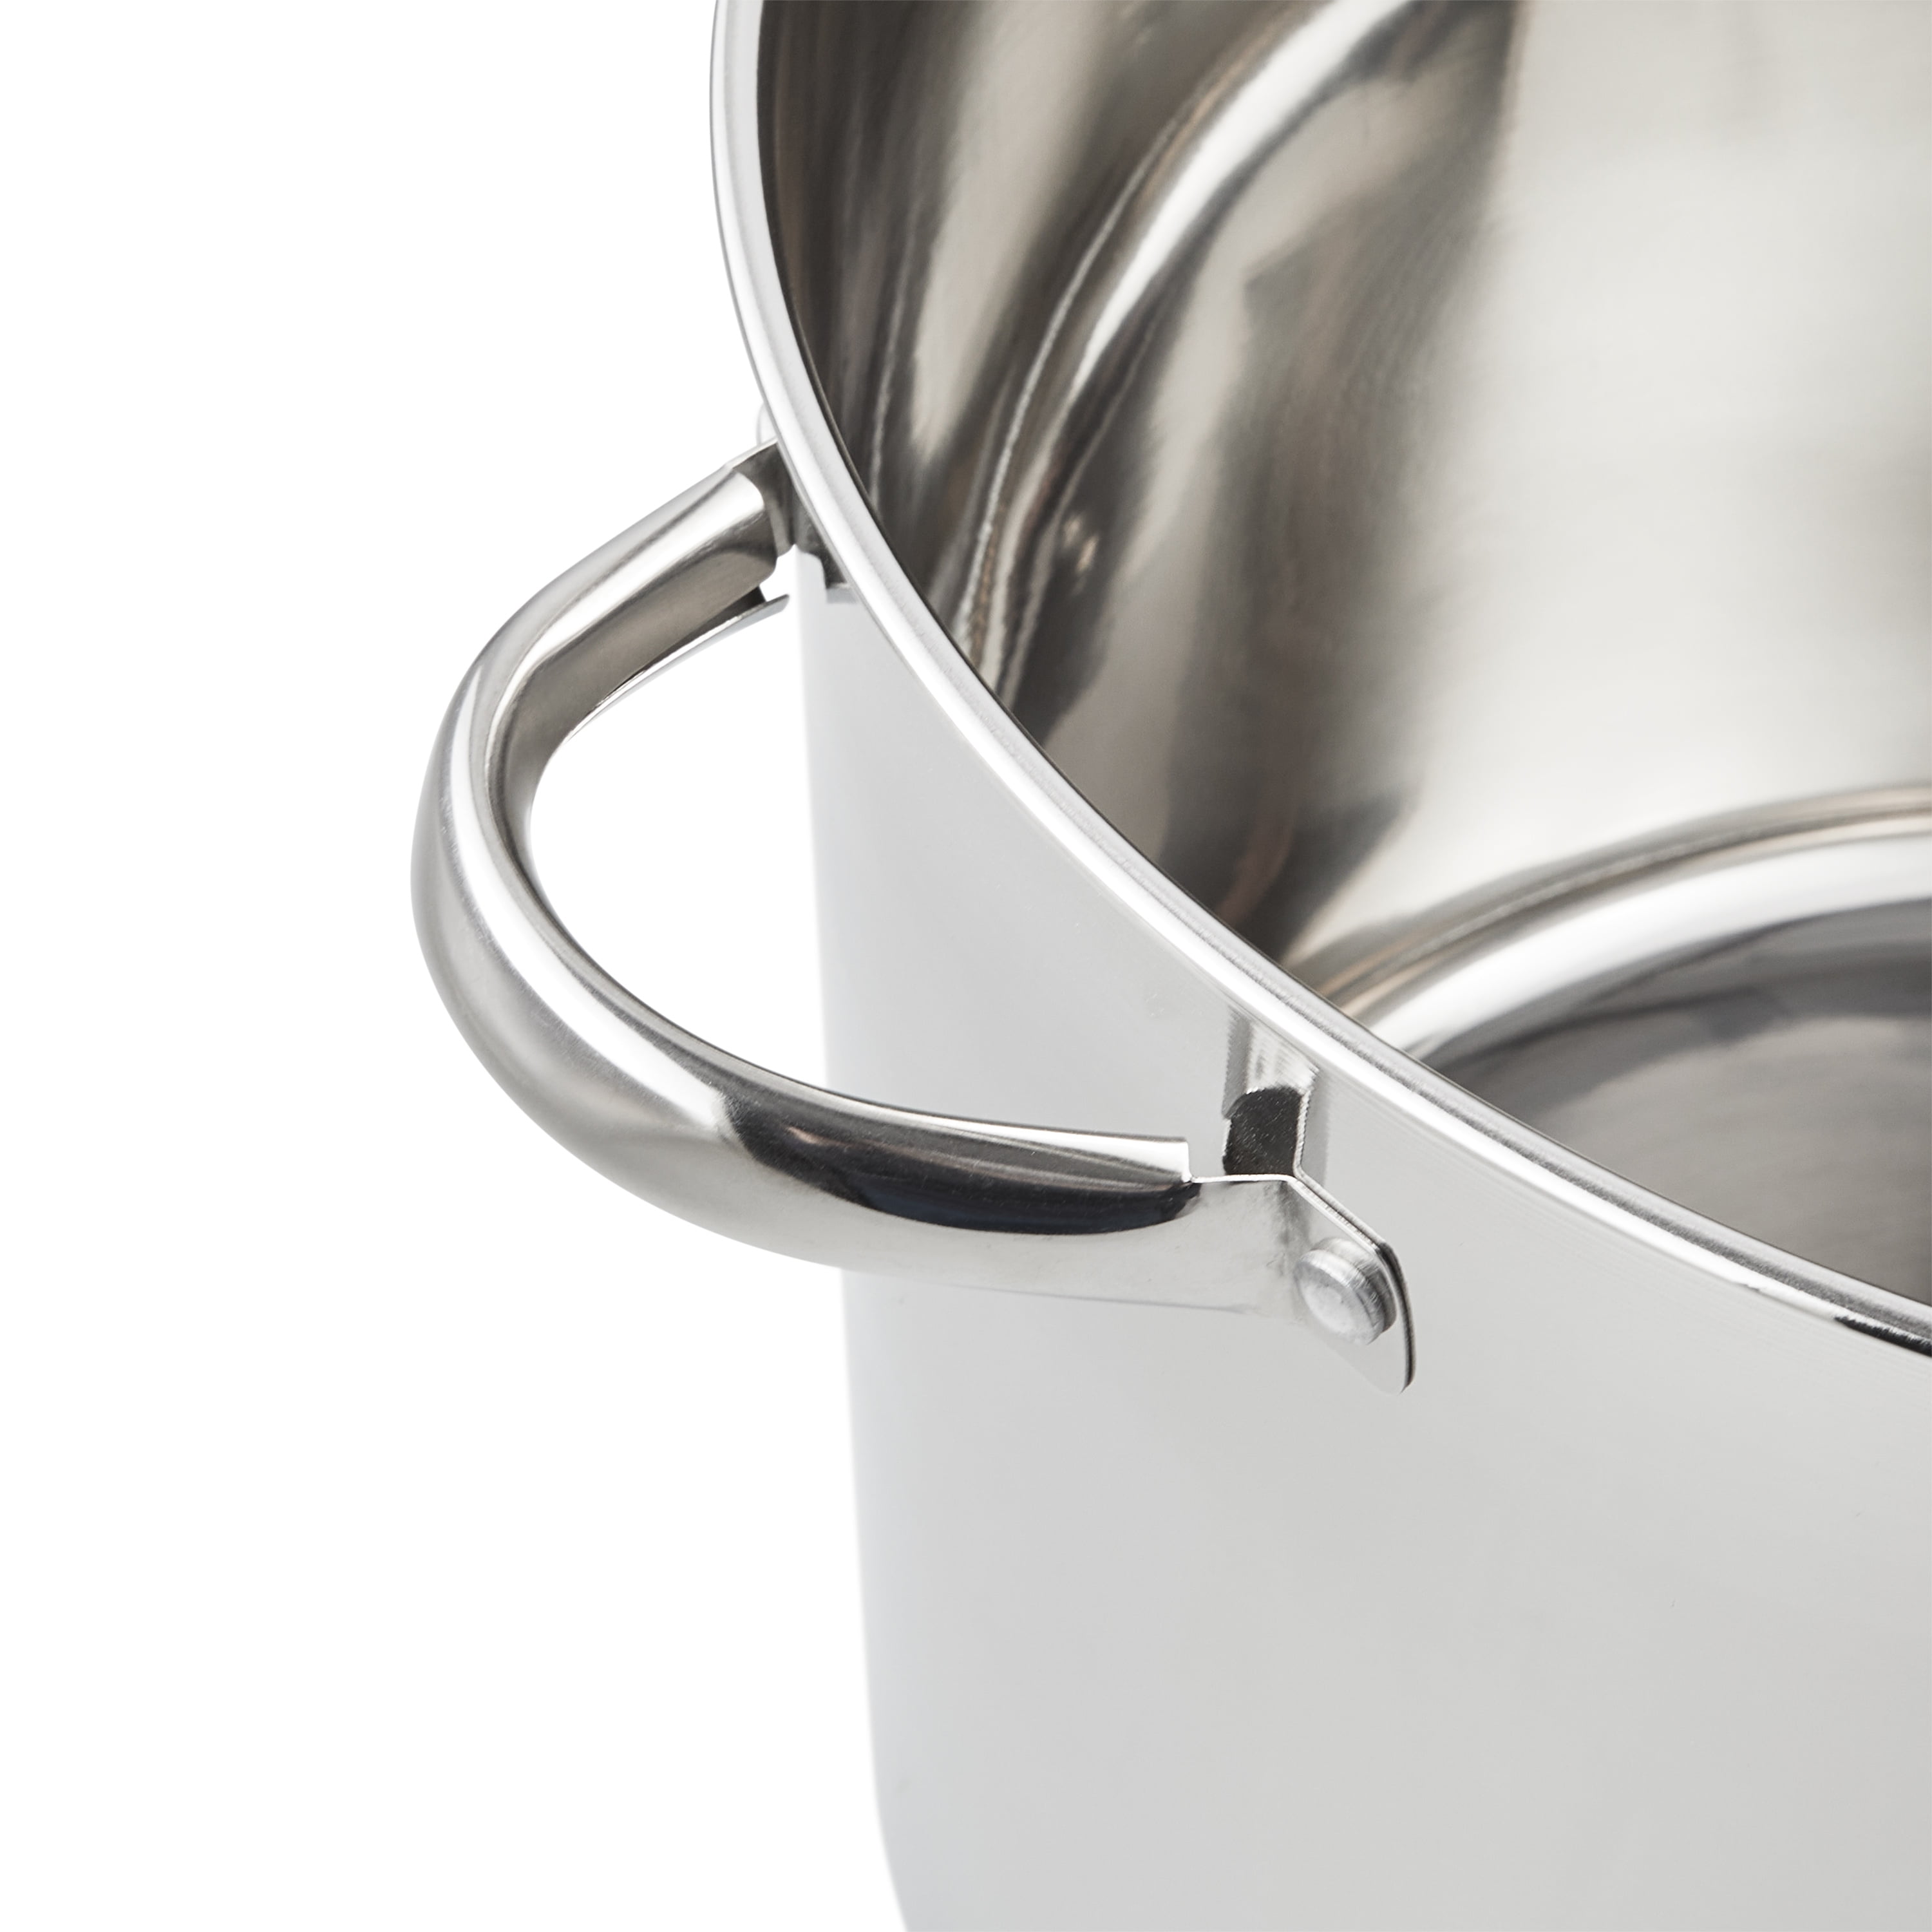 Mainstays Stainless Steel 20-Quart Stock Pot with Glass Lid 